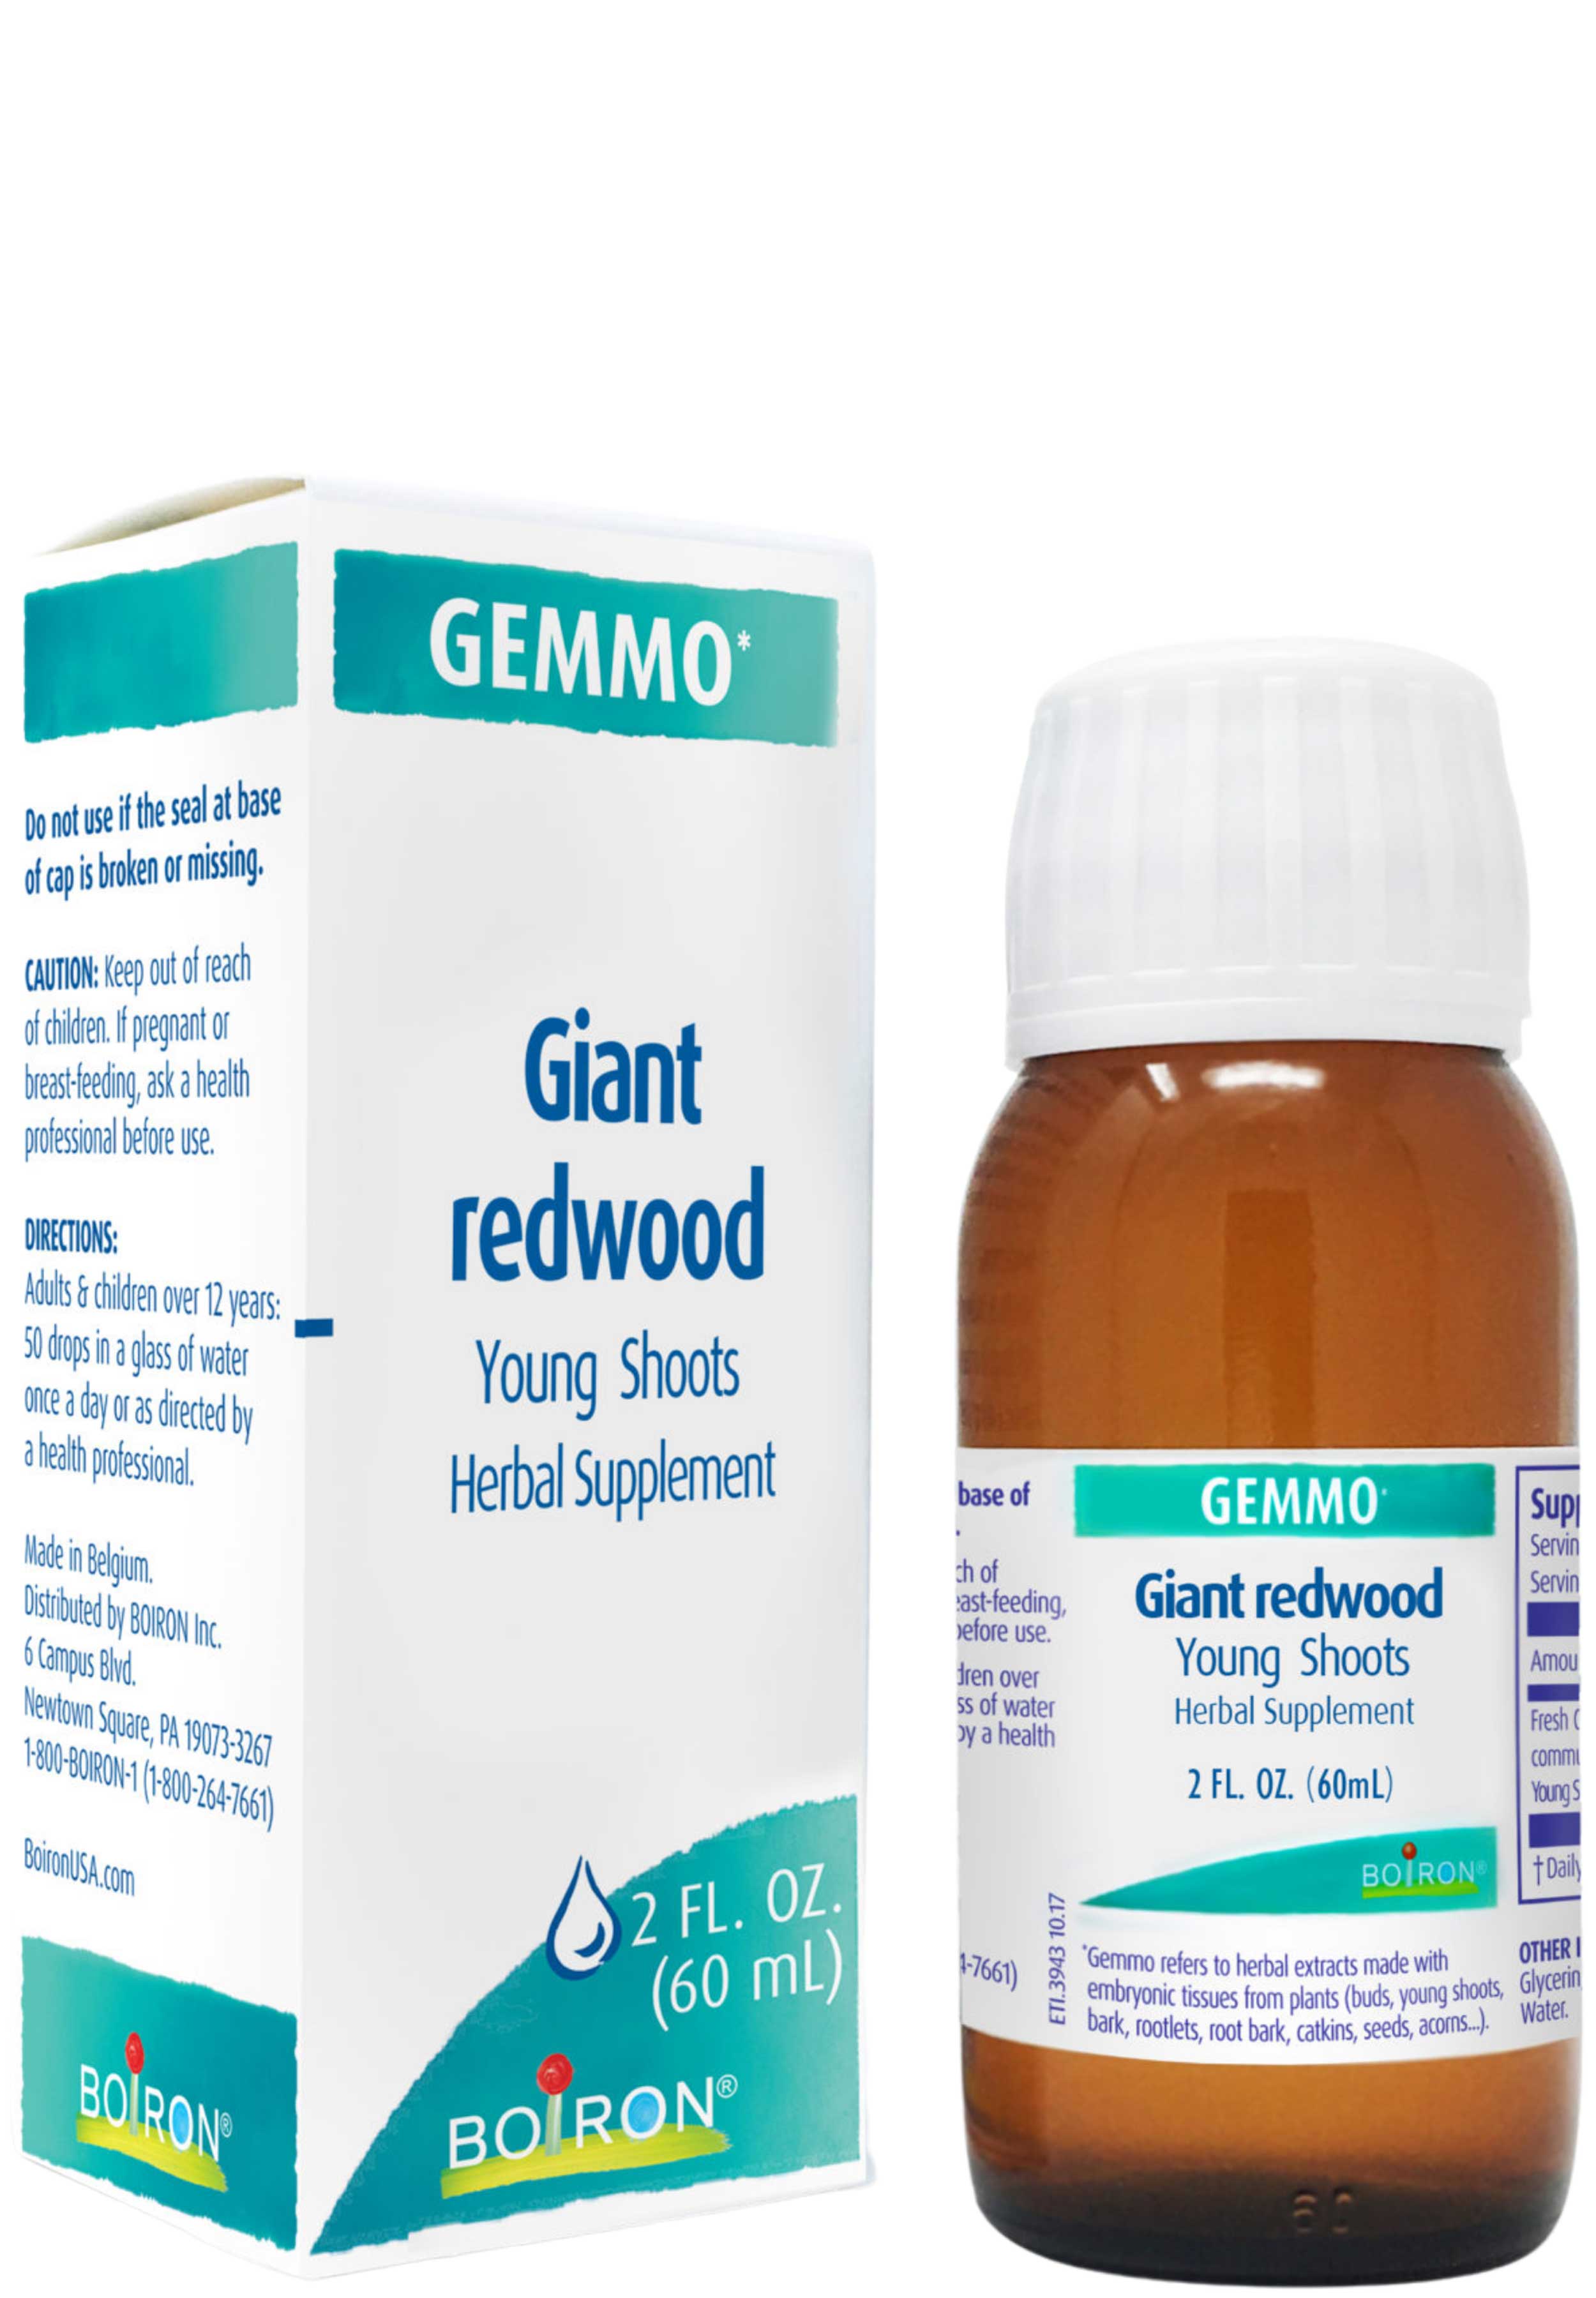 Boiron Homeopathics Gemmo Giant Redwood Young Shoots